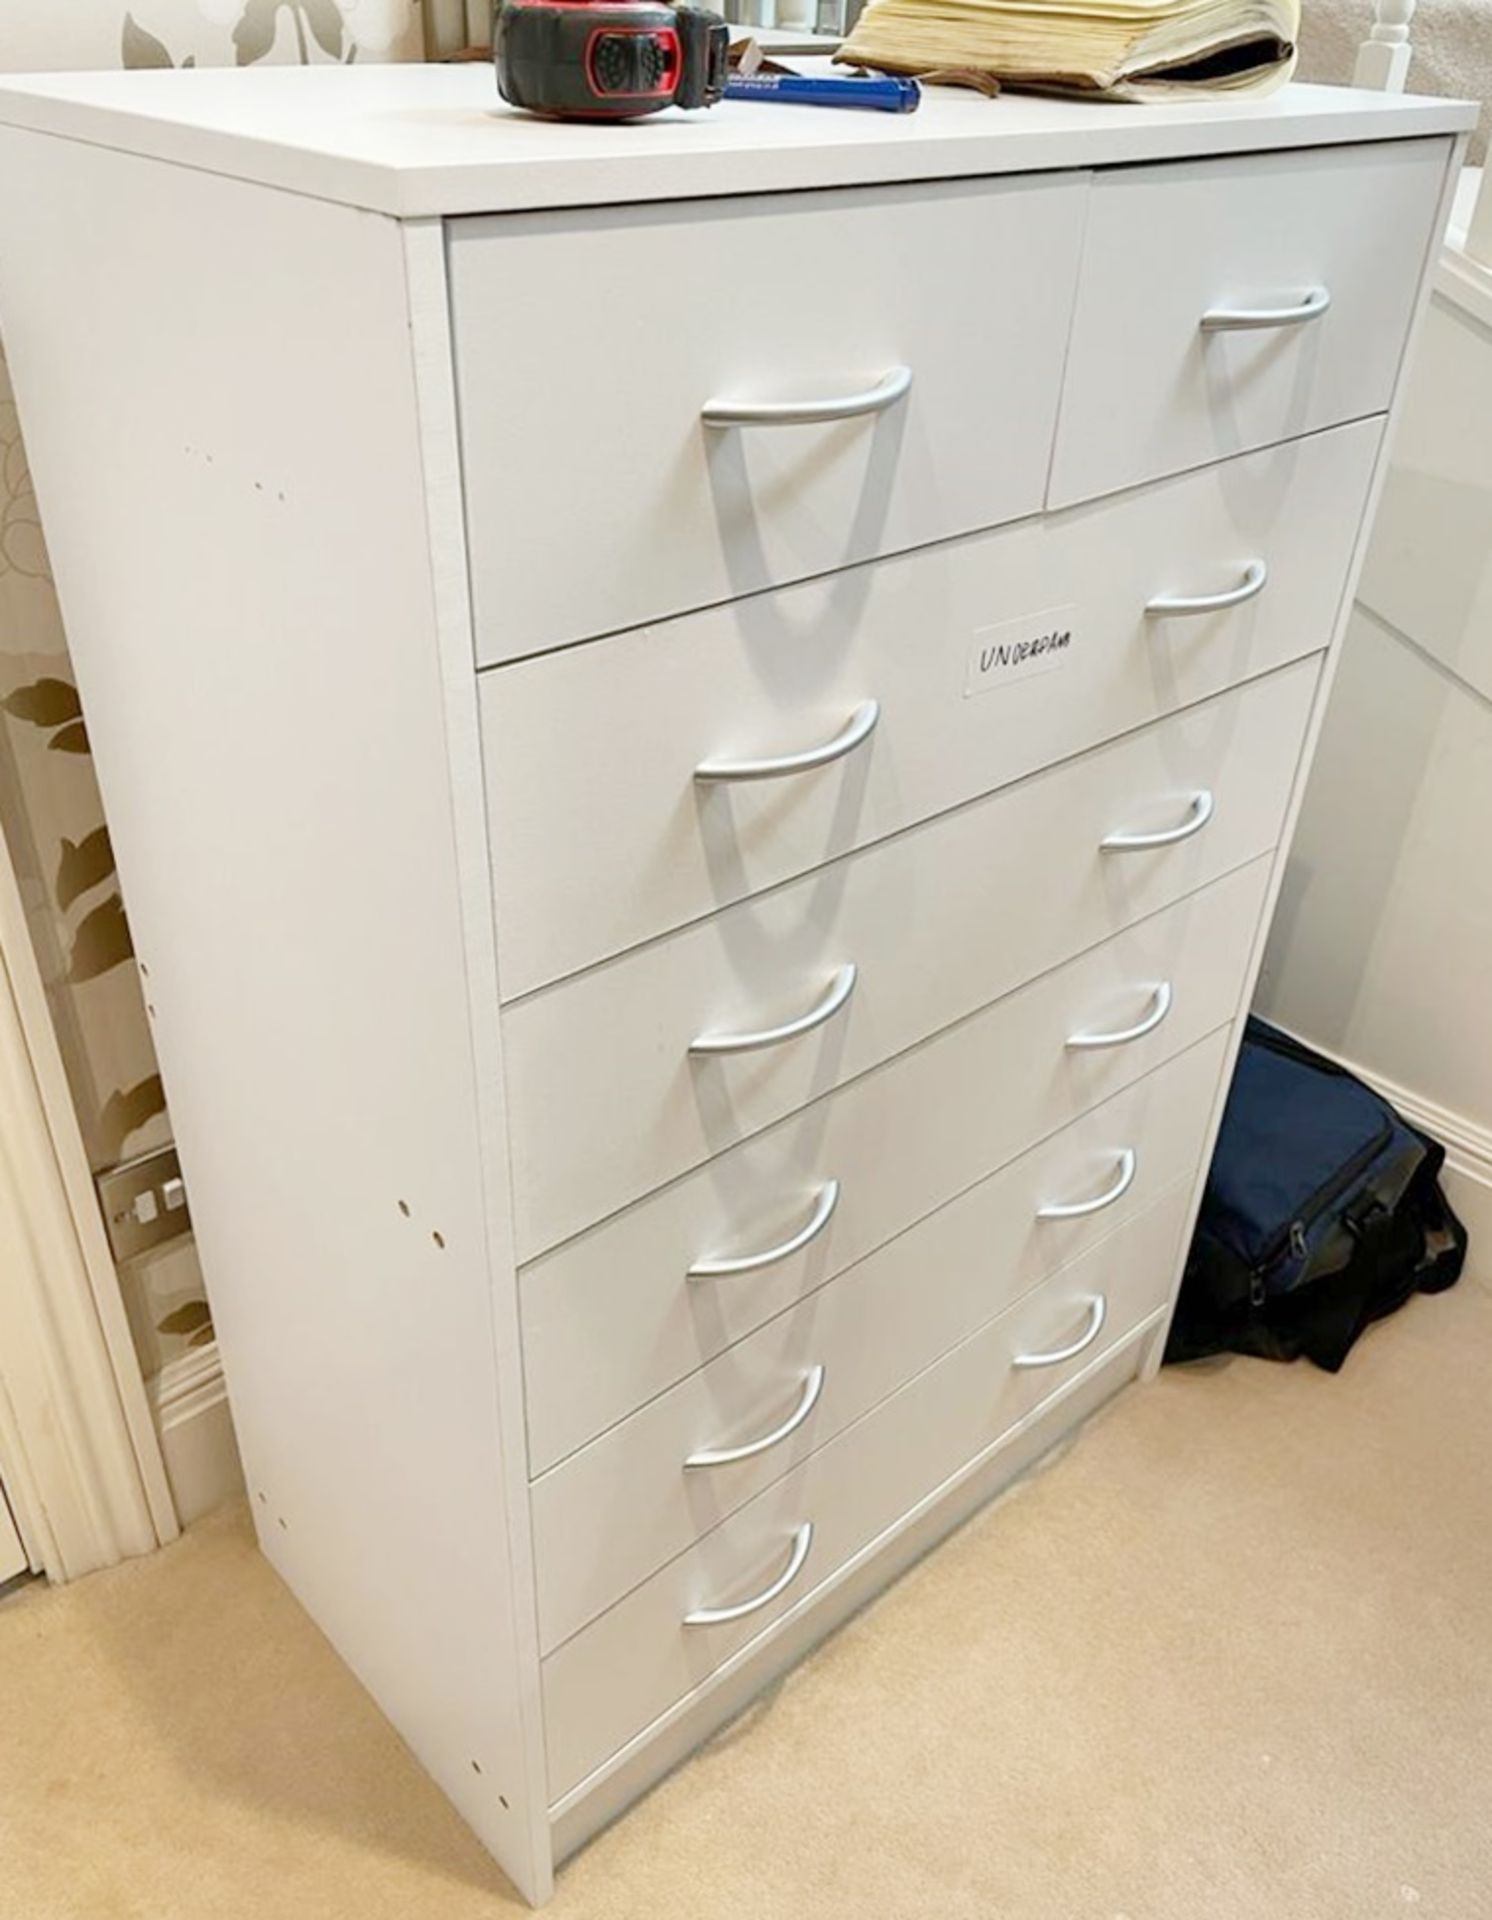 1 x Bedroom Furniture Set of Include Two Chest of Drawers, Two Bedside Tables, Small Drawer Unit and